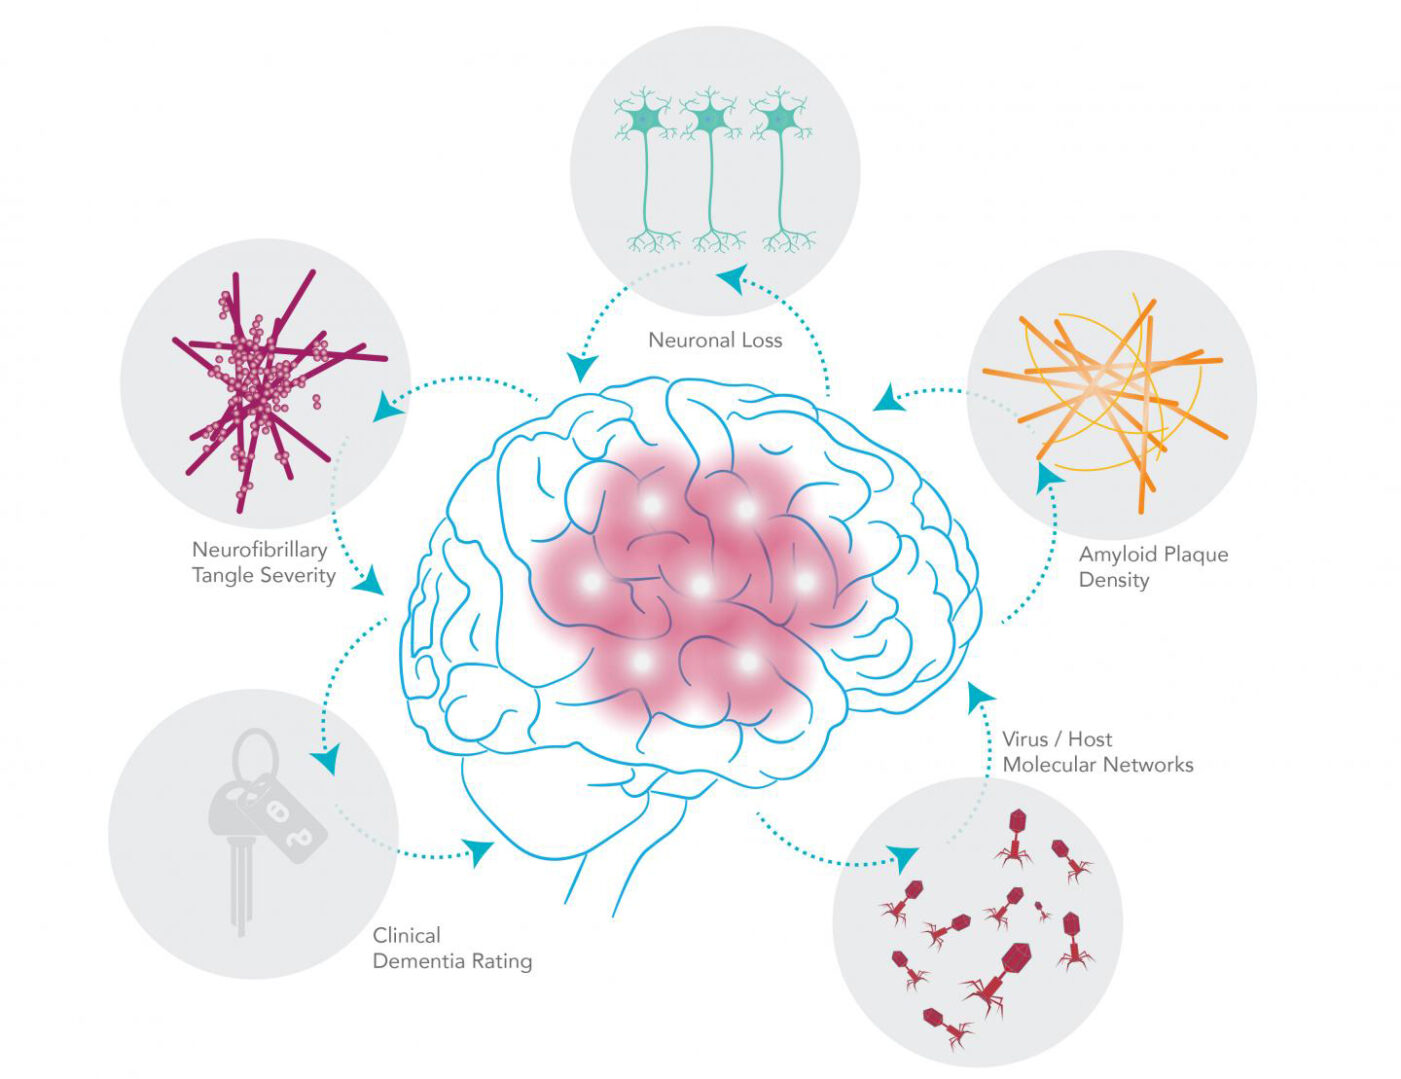 Viral–host networks, including genes and RNA transcripts, interact in complex ways. A pair of herpesviruses—HHV 6A and 7—were found in greater abundance in brain samples from AD patients compared with normal brains. These viruses seem to also be implicated in the AD-related genetic networks responsible for classic Alzheimer's pathology, including cell death, the deposition of amyloid plaque, and production of neurofibrillary tangles. [Shireen Dooling for the Biodesign Institute at ASU]